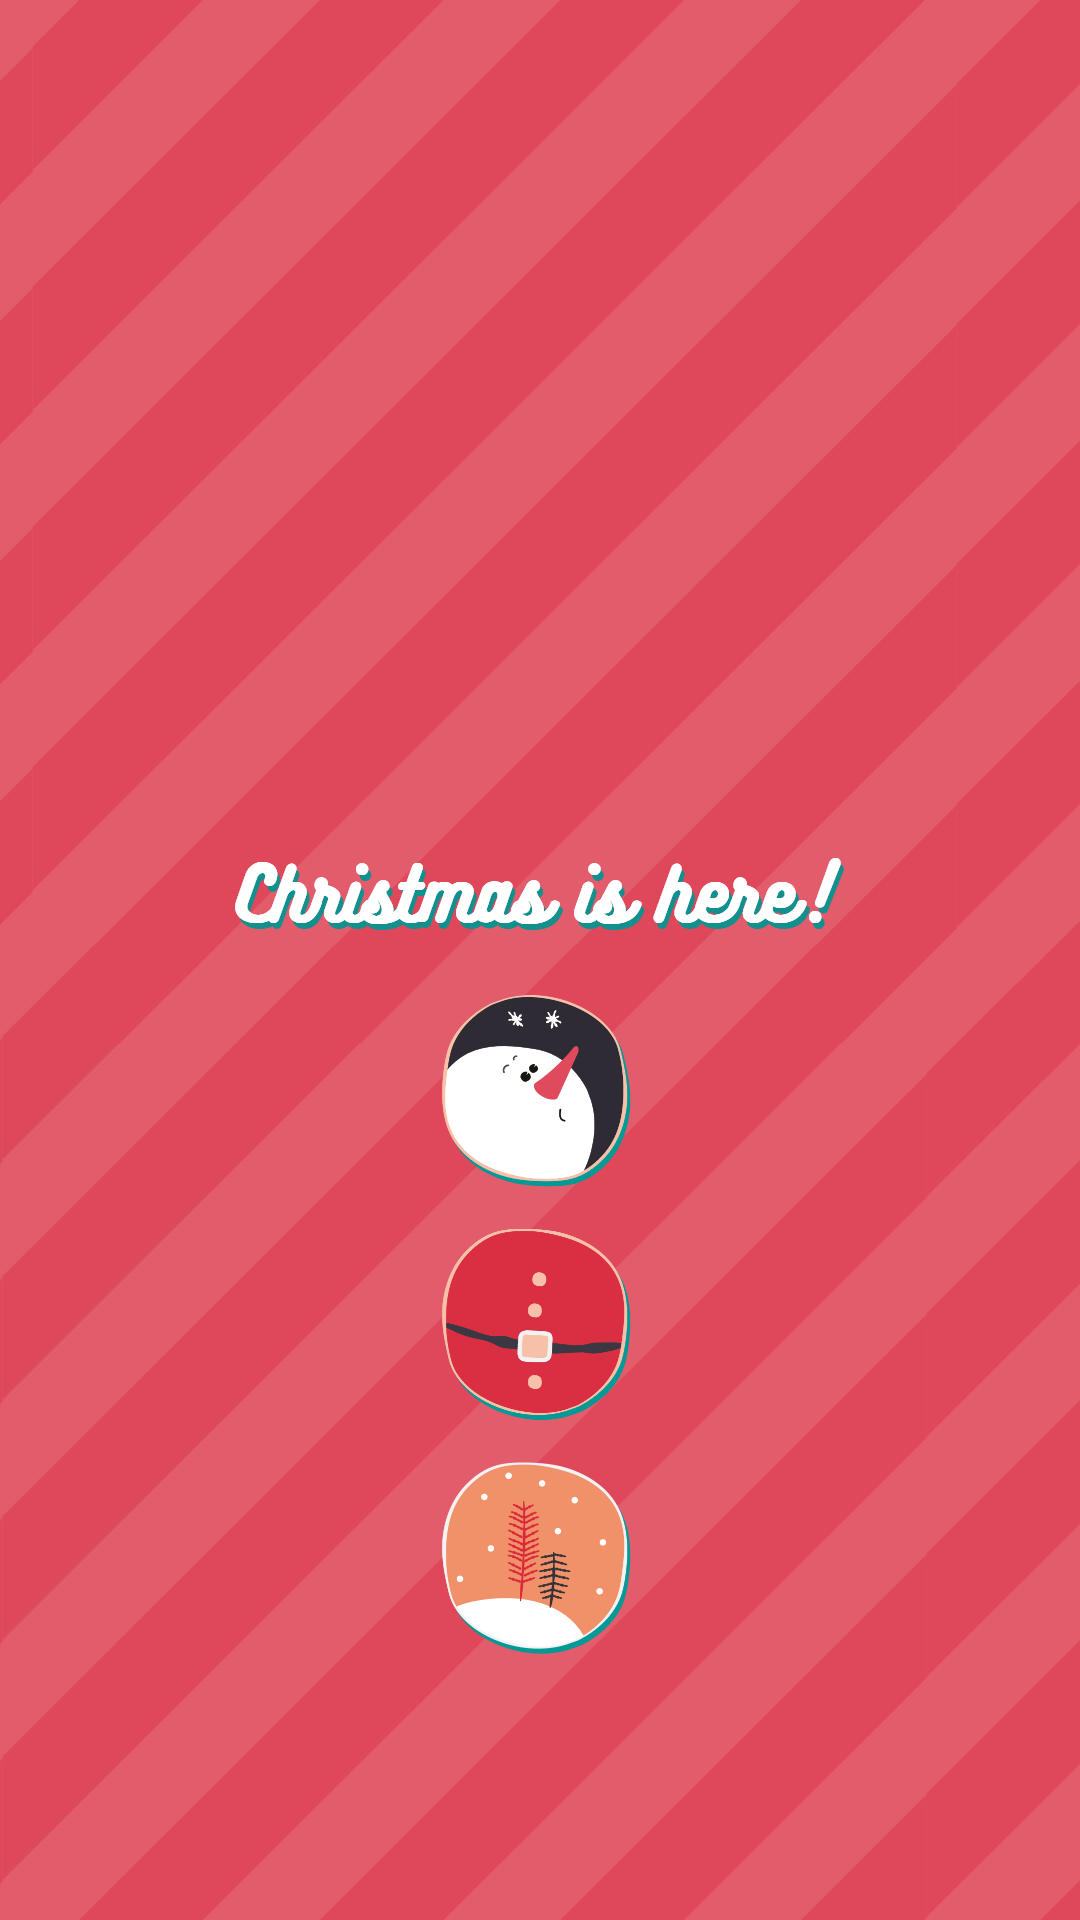 50 Free Christmas Wallpaper Backgrounds For Your iPhone